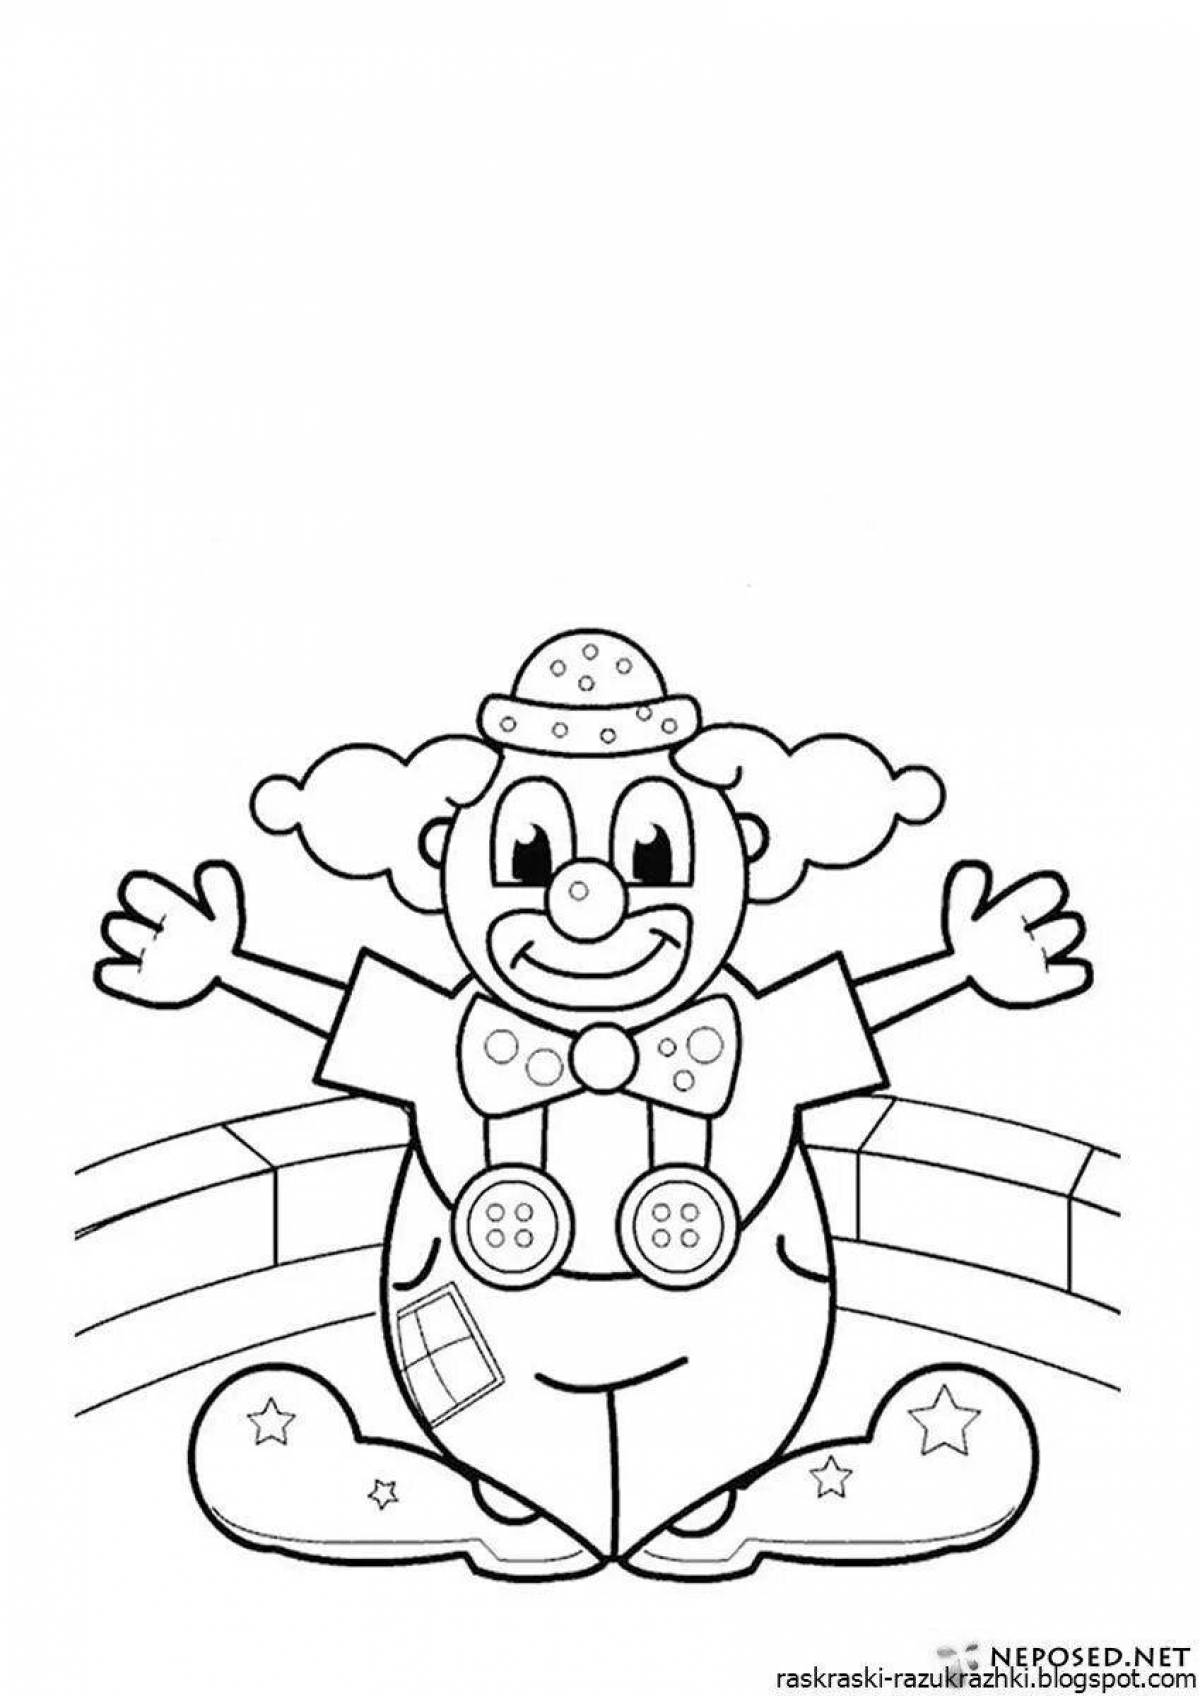 Colorful clown coloring for kids